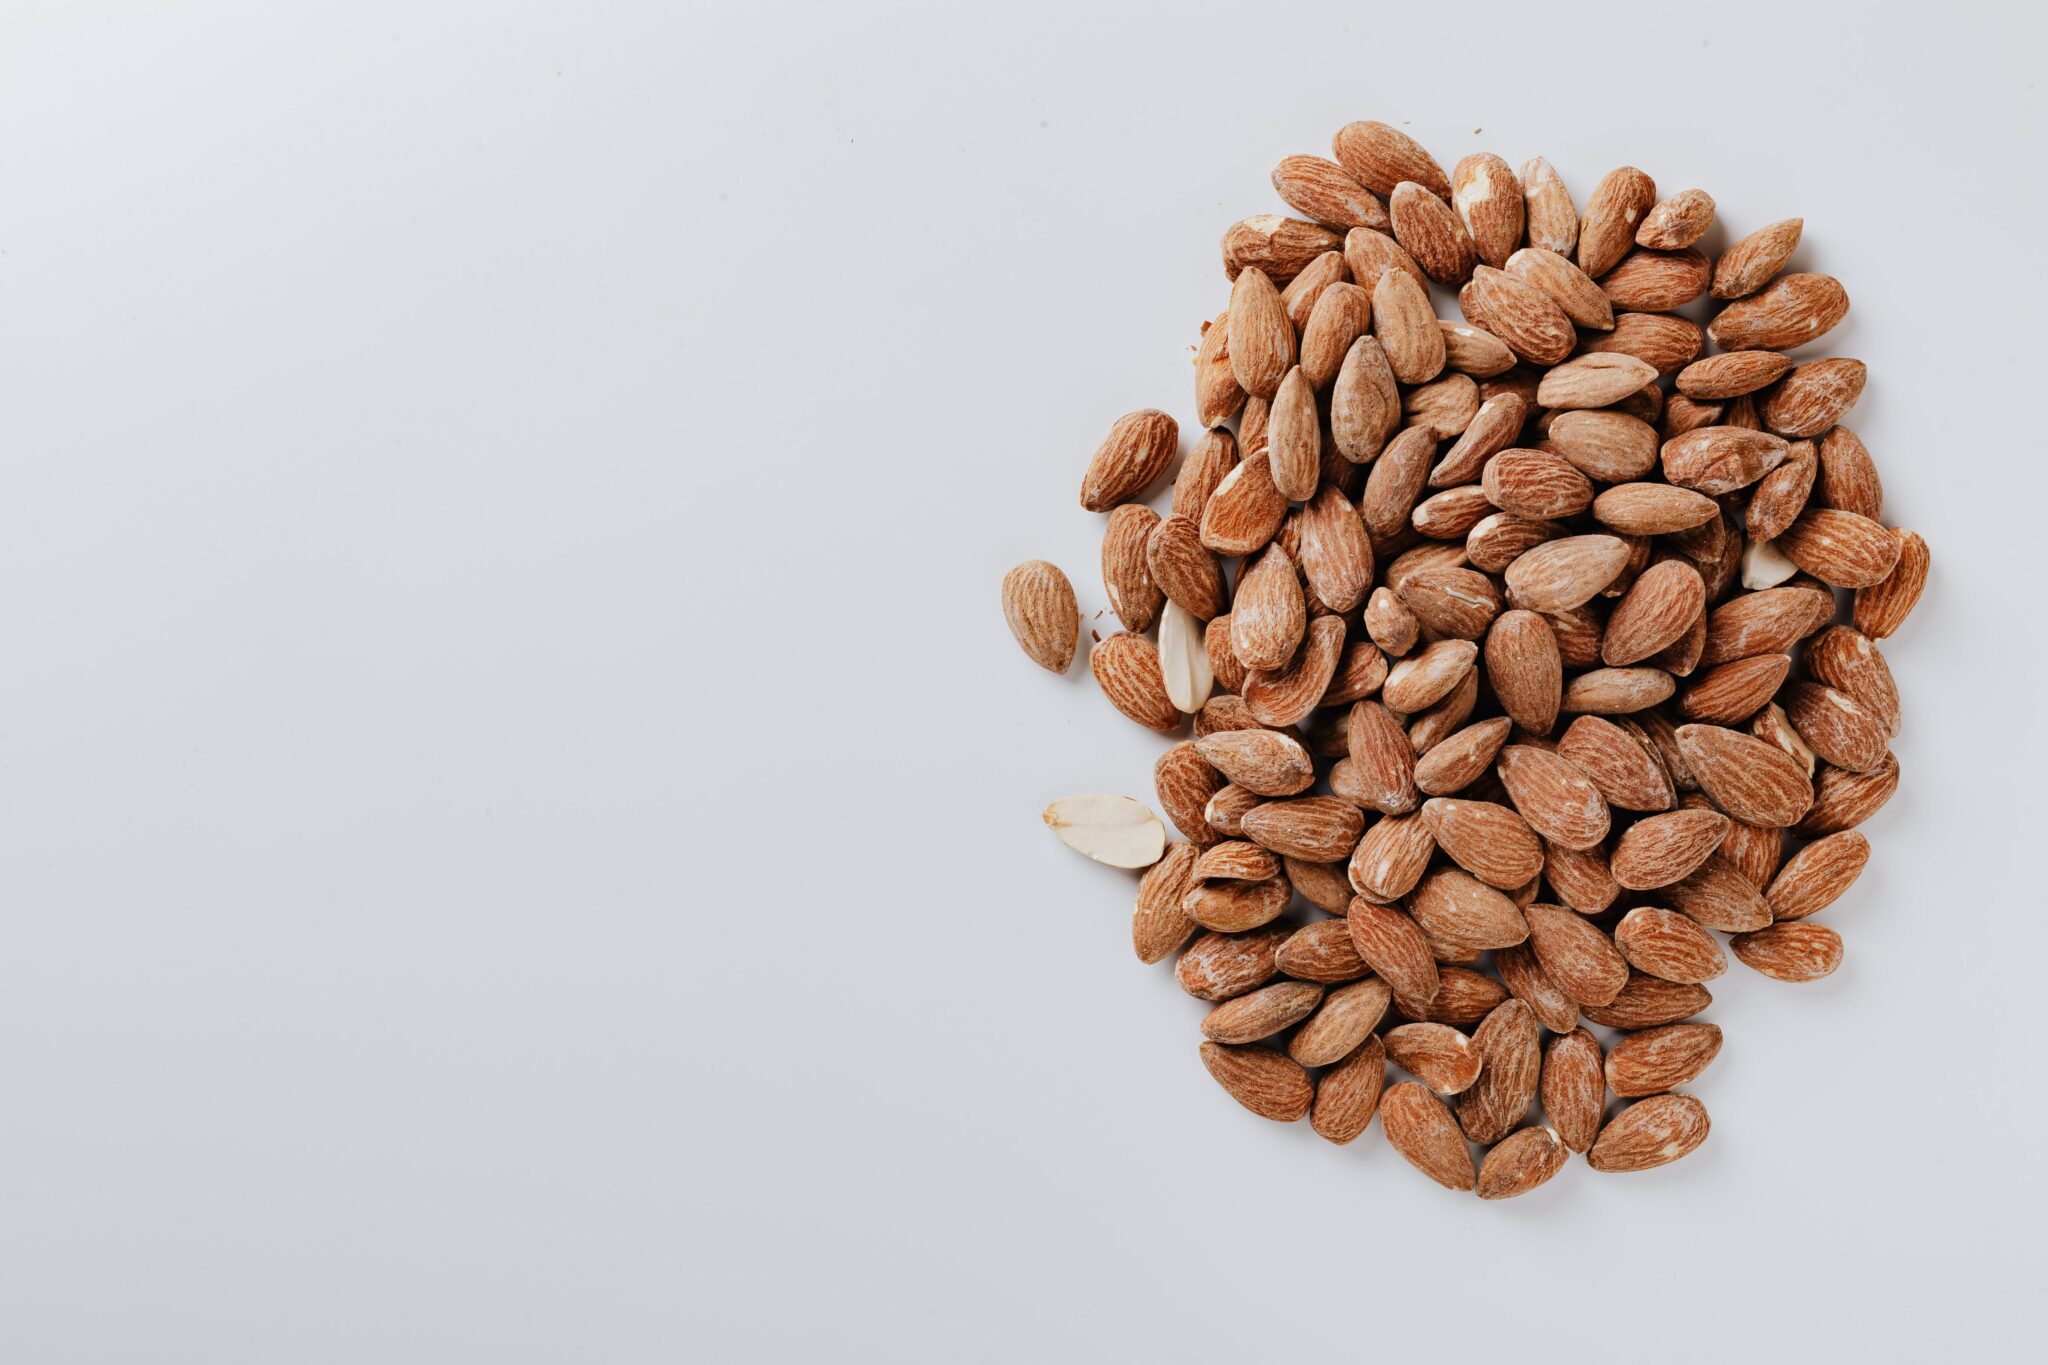 Could Almonds Help Manage Diabetes And Depression